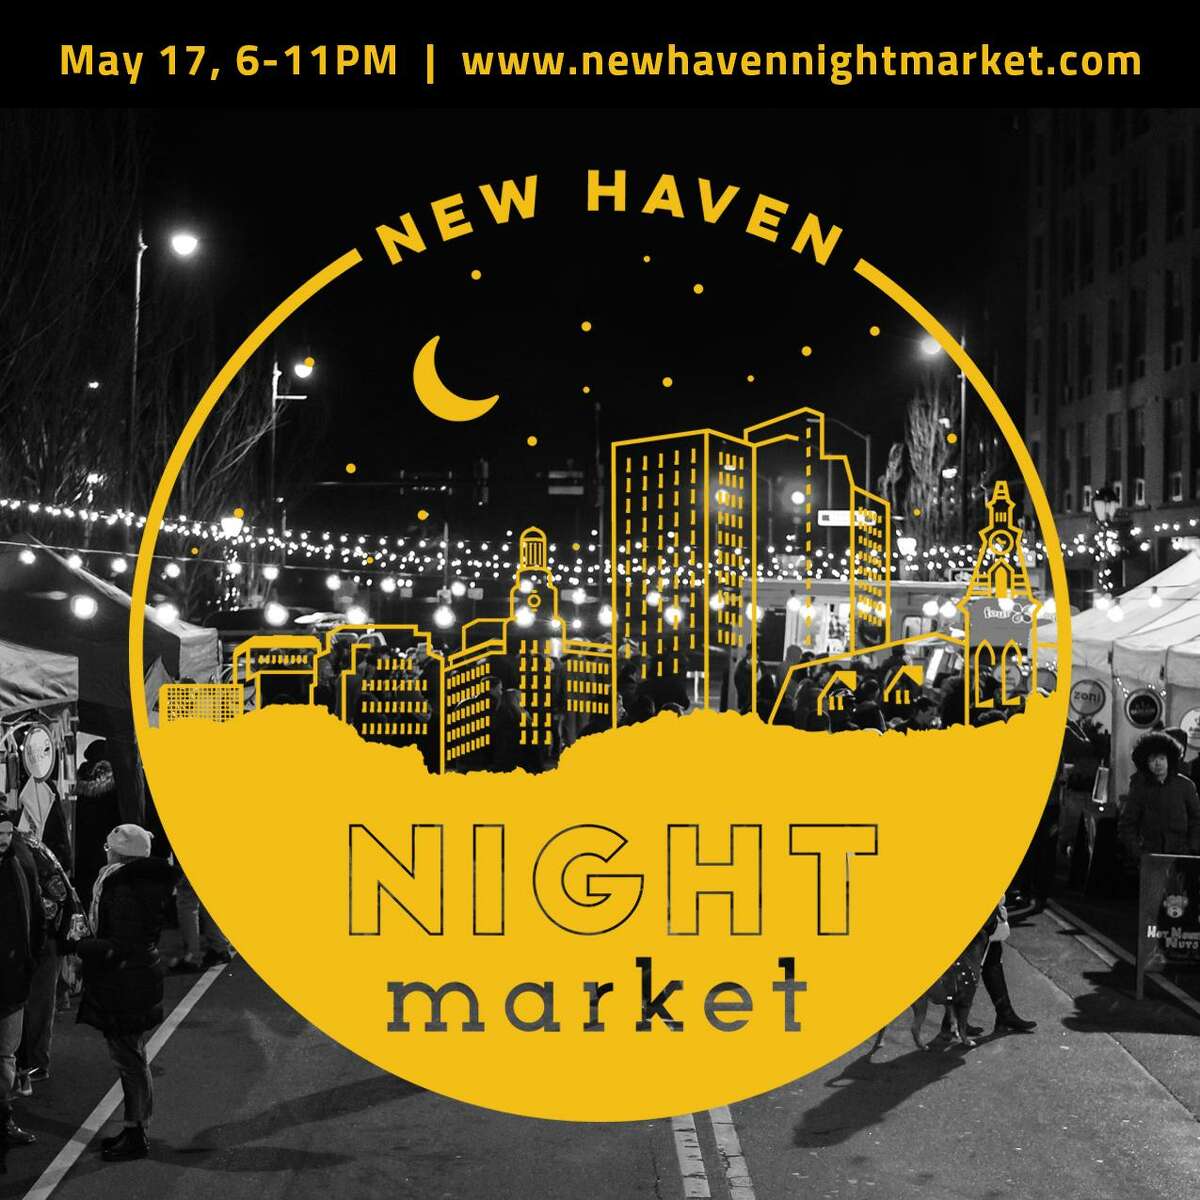 The Night Market will run from 6 to 11 p.m. May 17 on College Street between Elm and Chapel streets in Downtown New Haven.